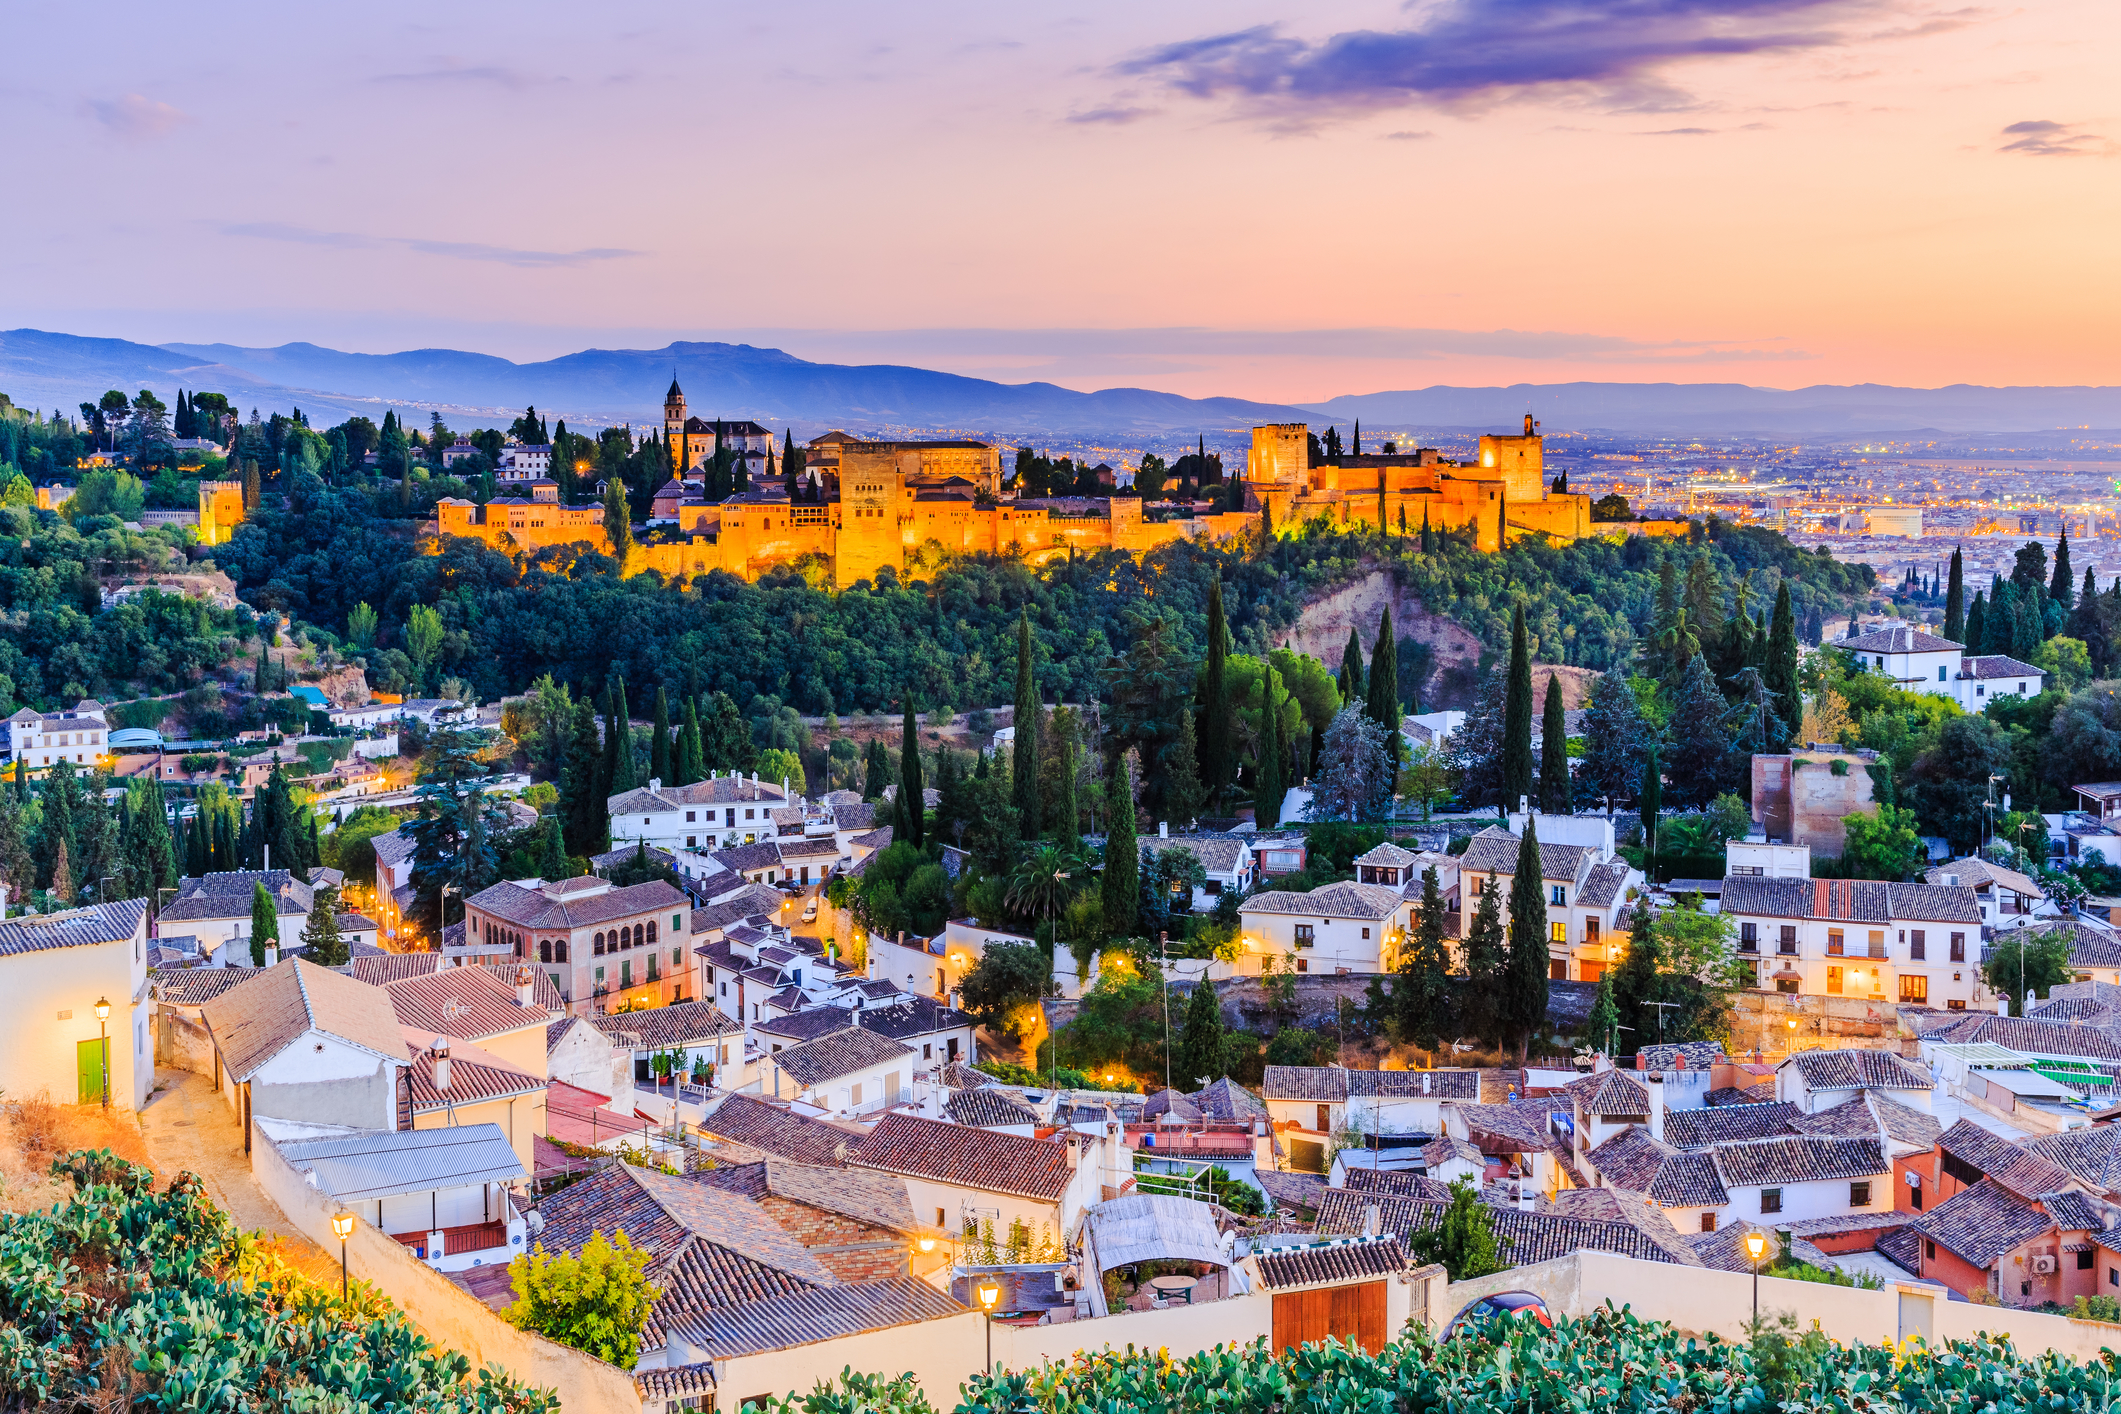 12-night getaway to Spain with airfare, hotel and daily breakfast from $999